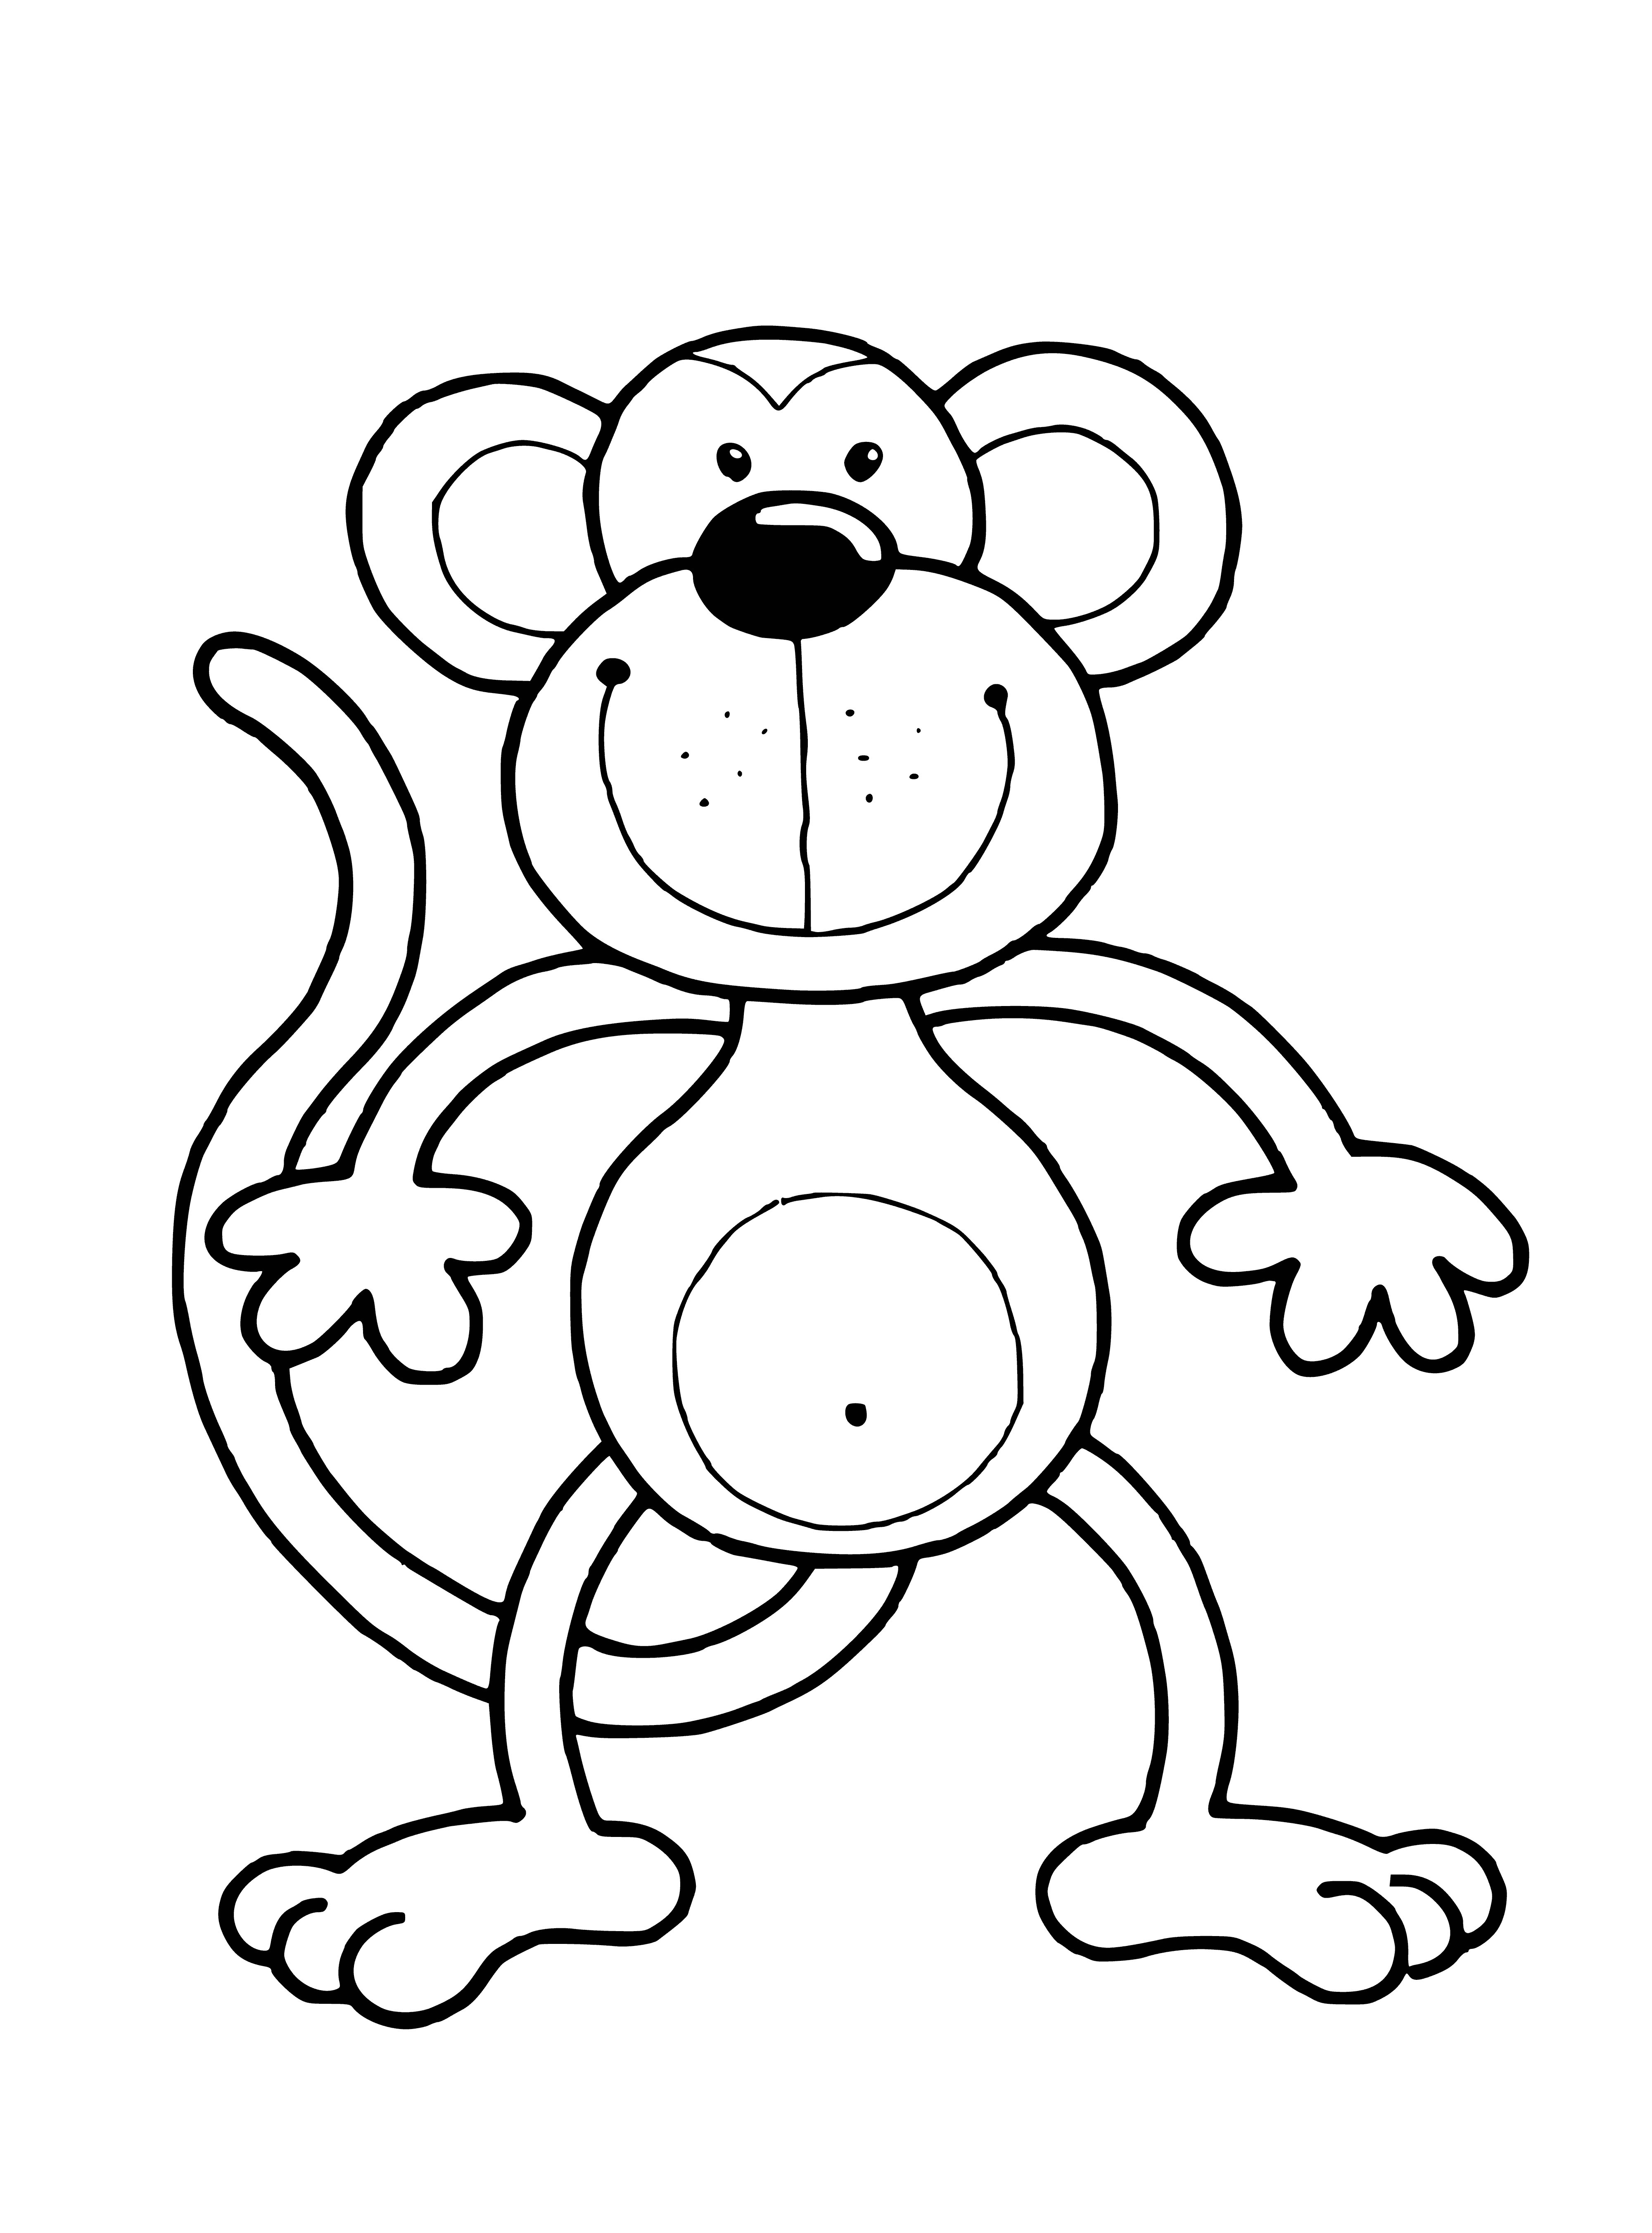 coloring page: Five chimps in a circle, arms around three, two with legs crossed, eyes closed.